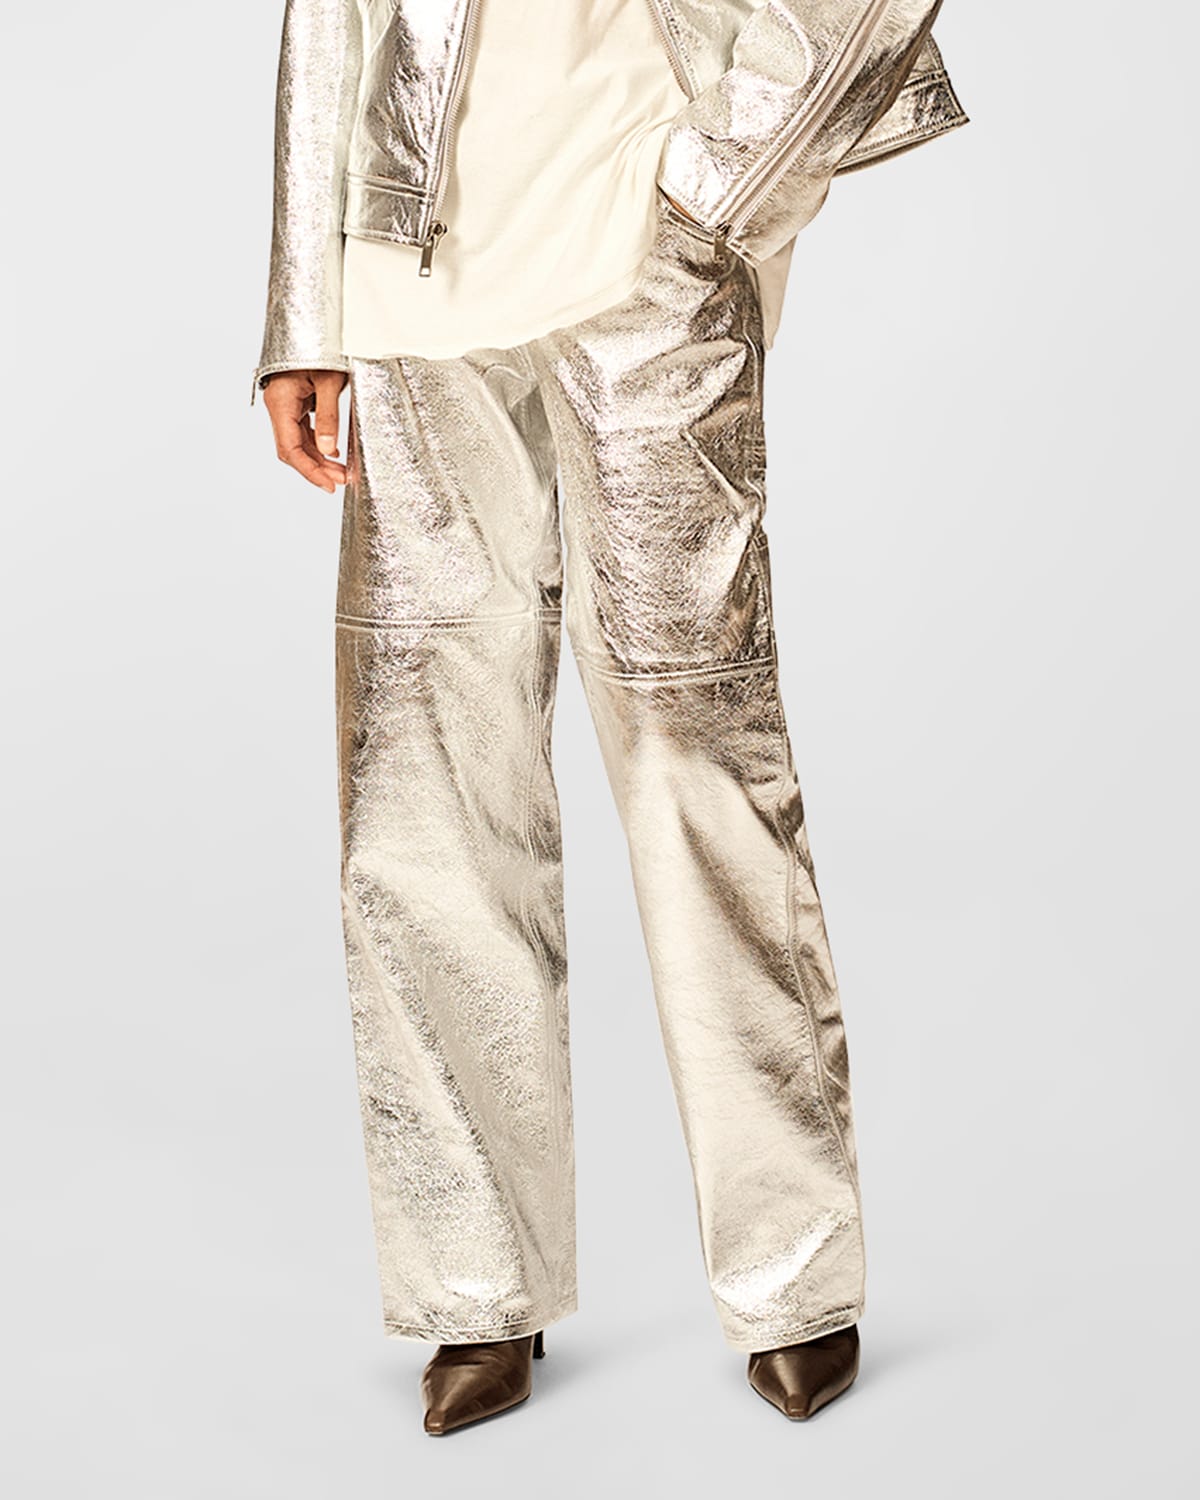 The Sterling Metallic Leather Pants